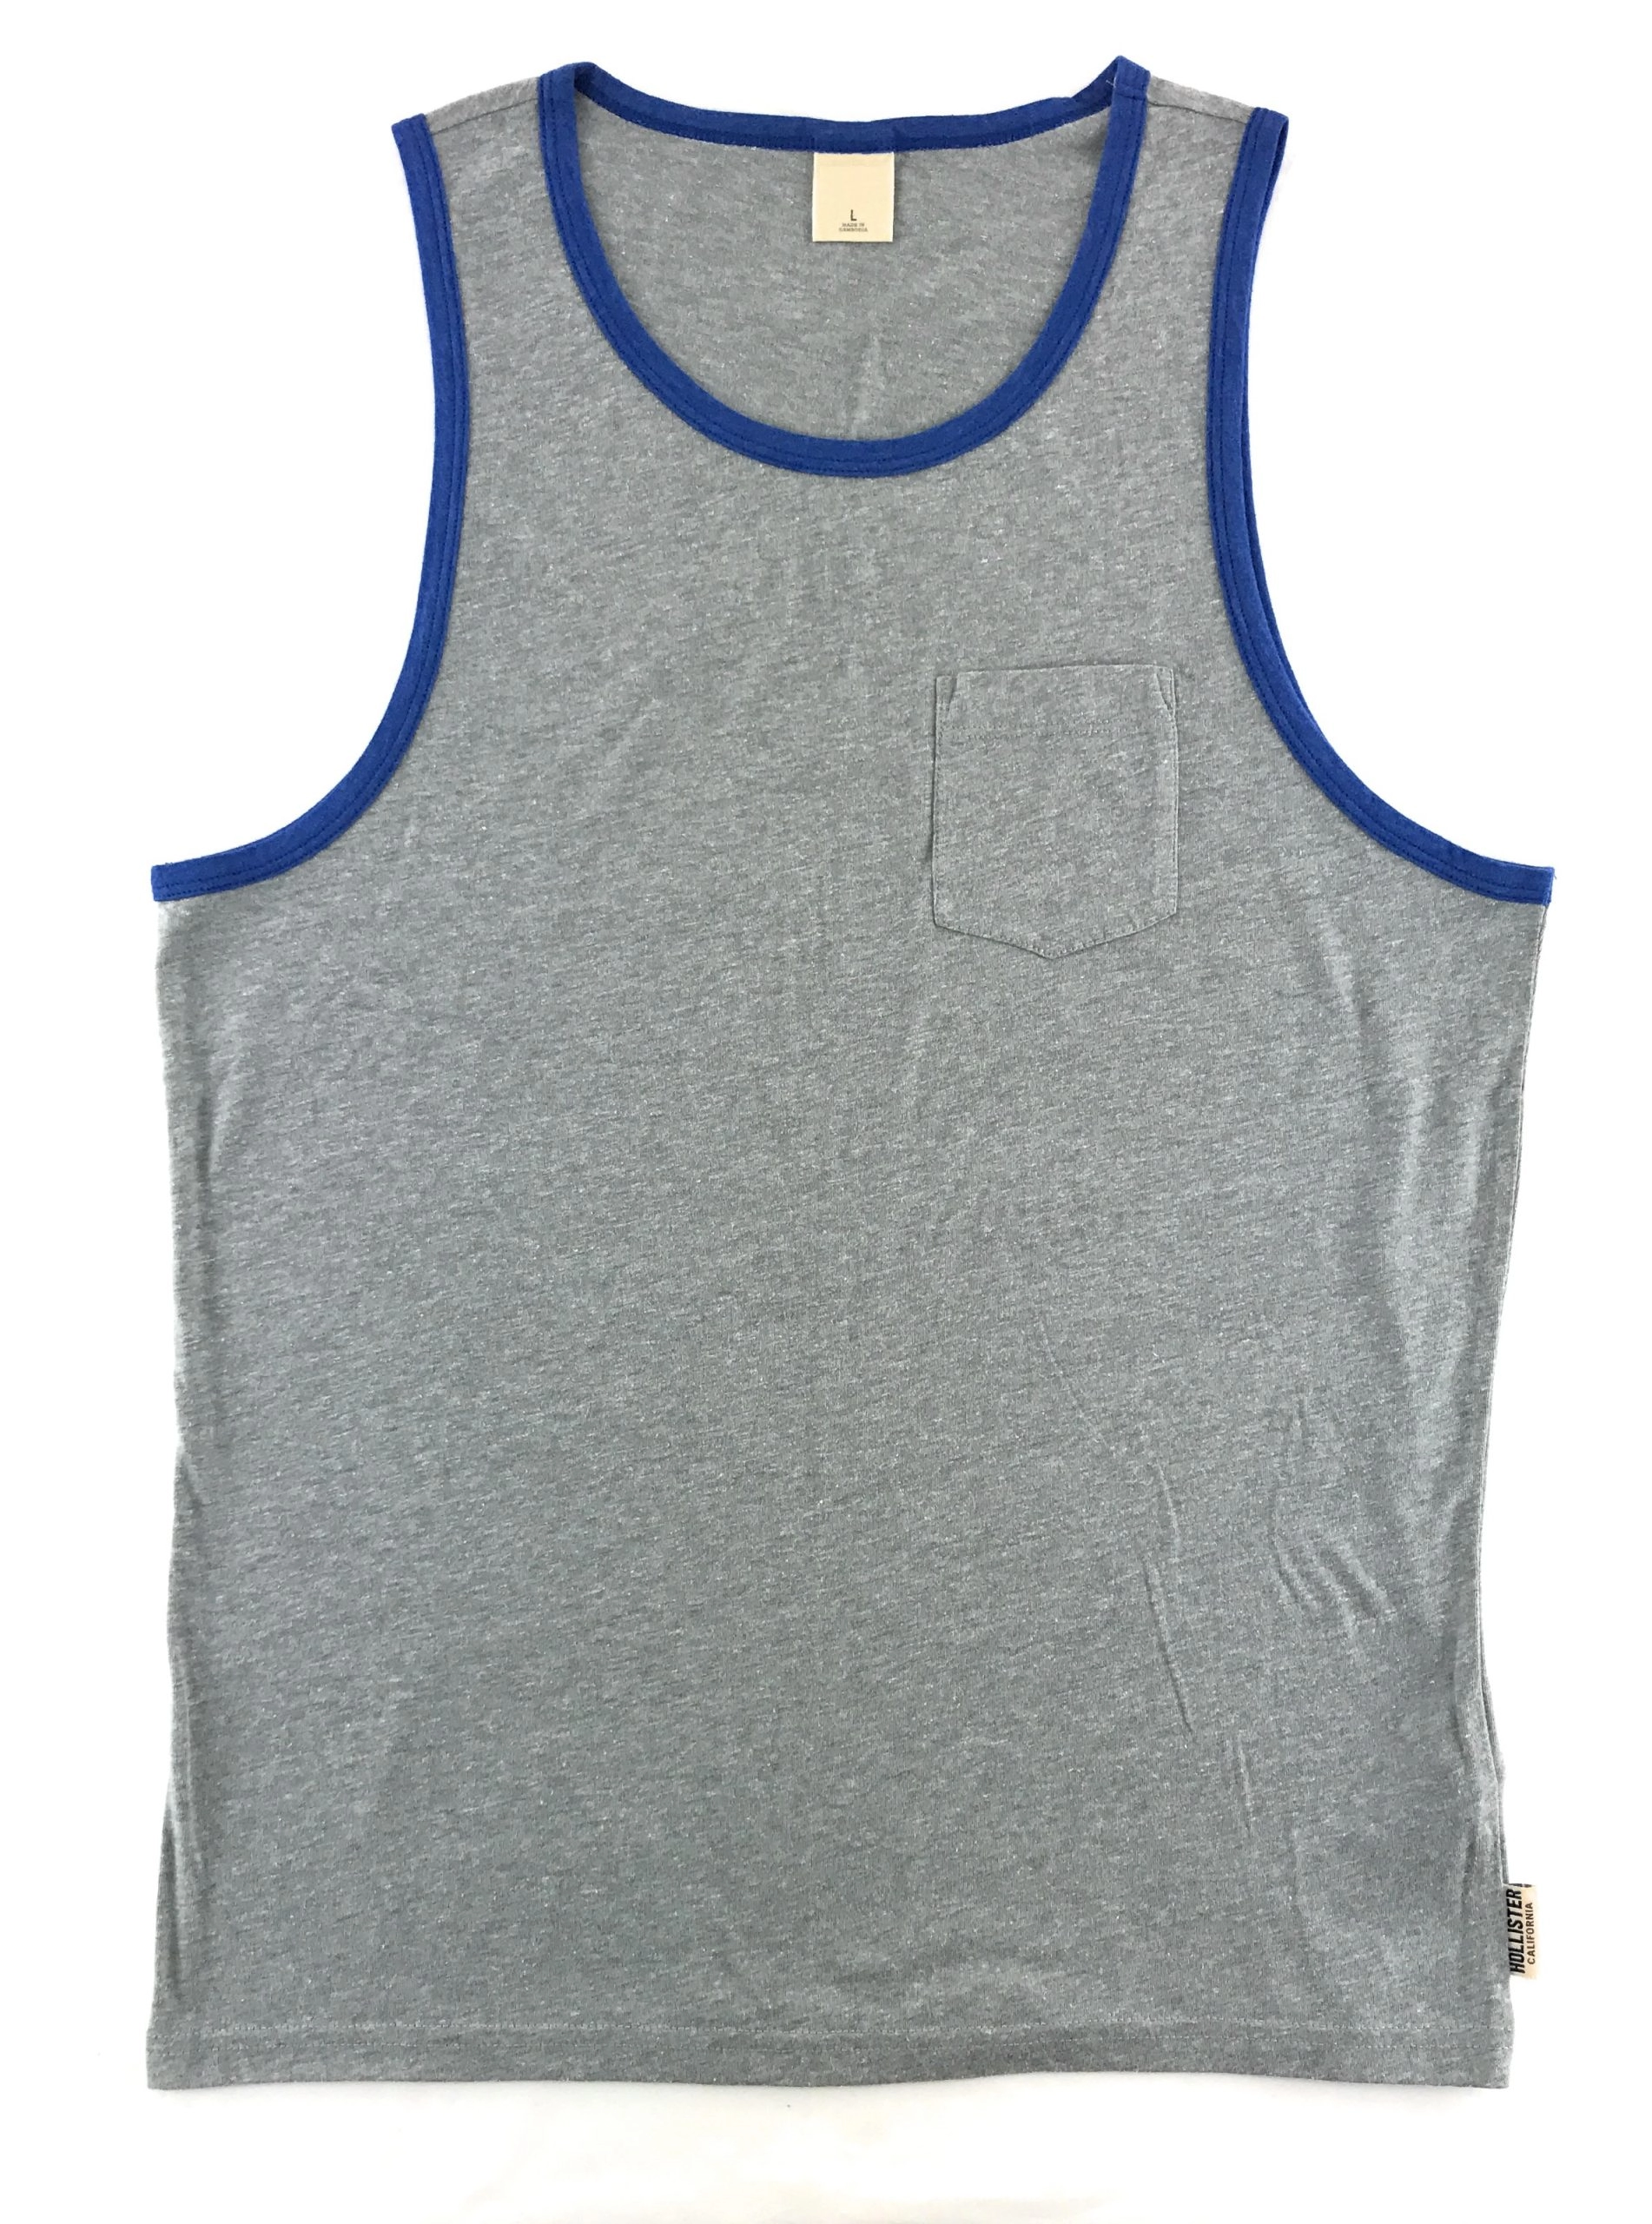 Contrast Piping 100% Cotton Mens Tank Top Wholesale